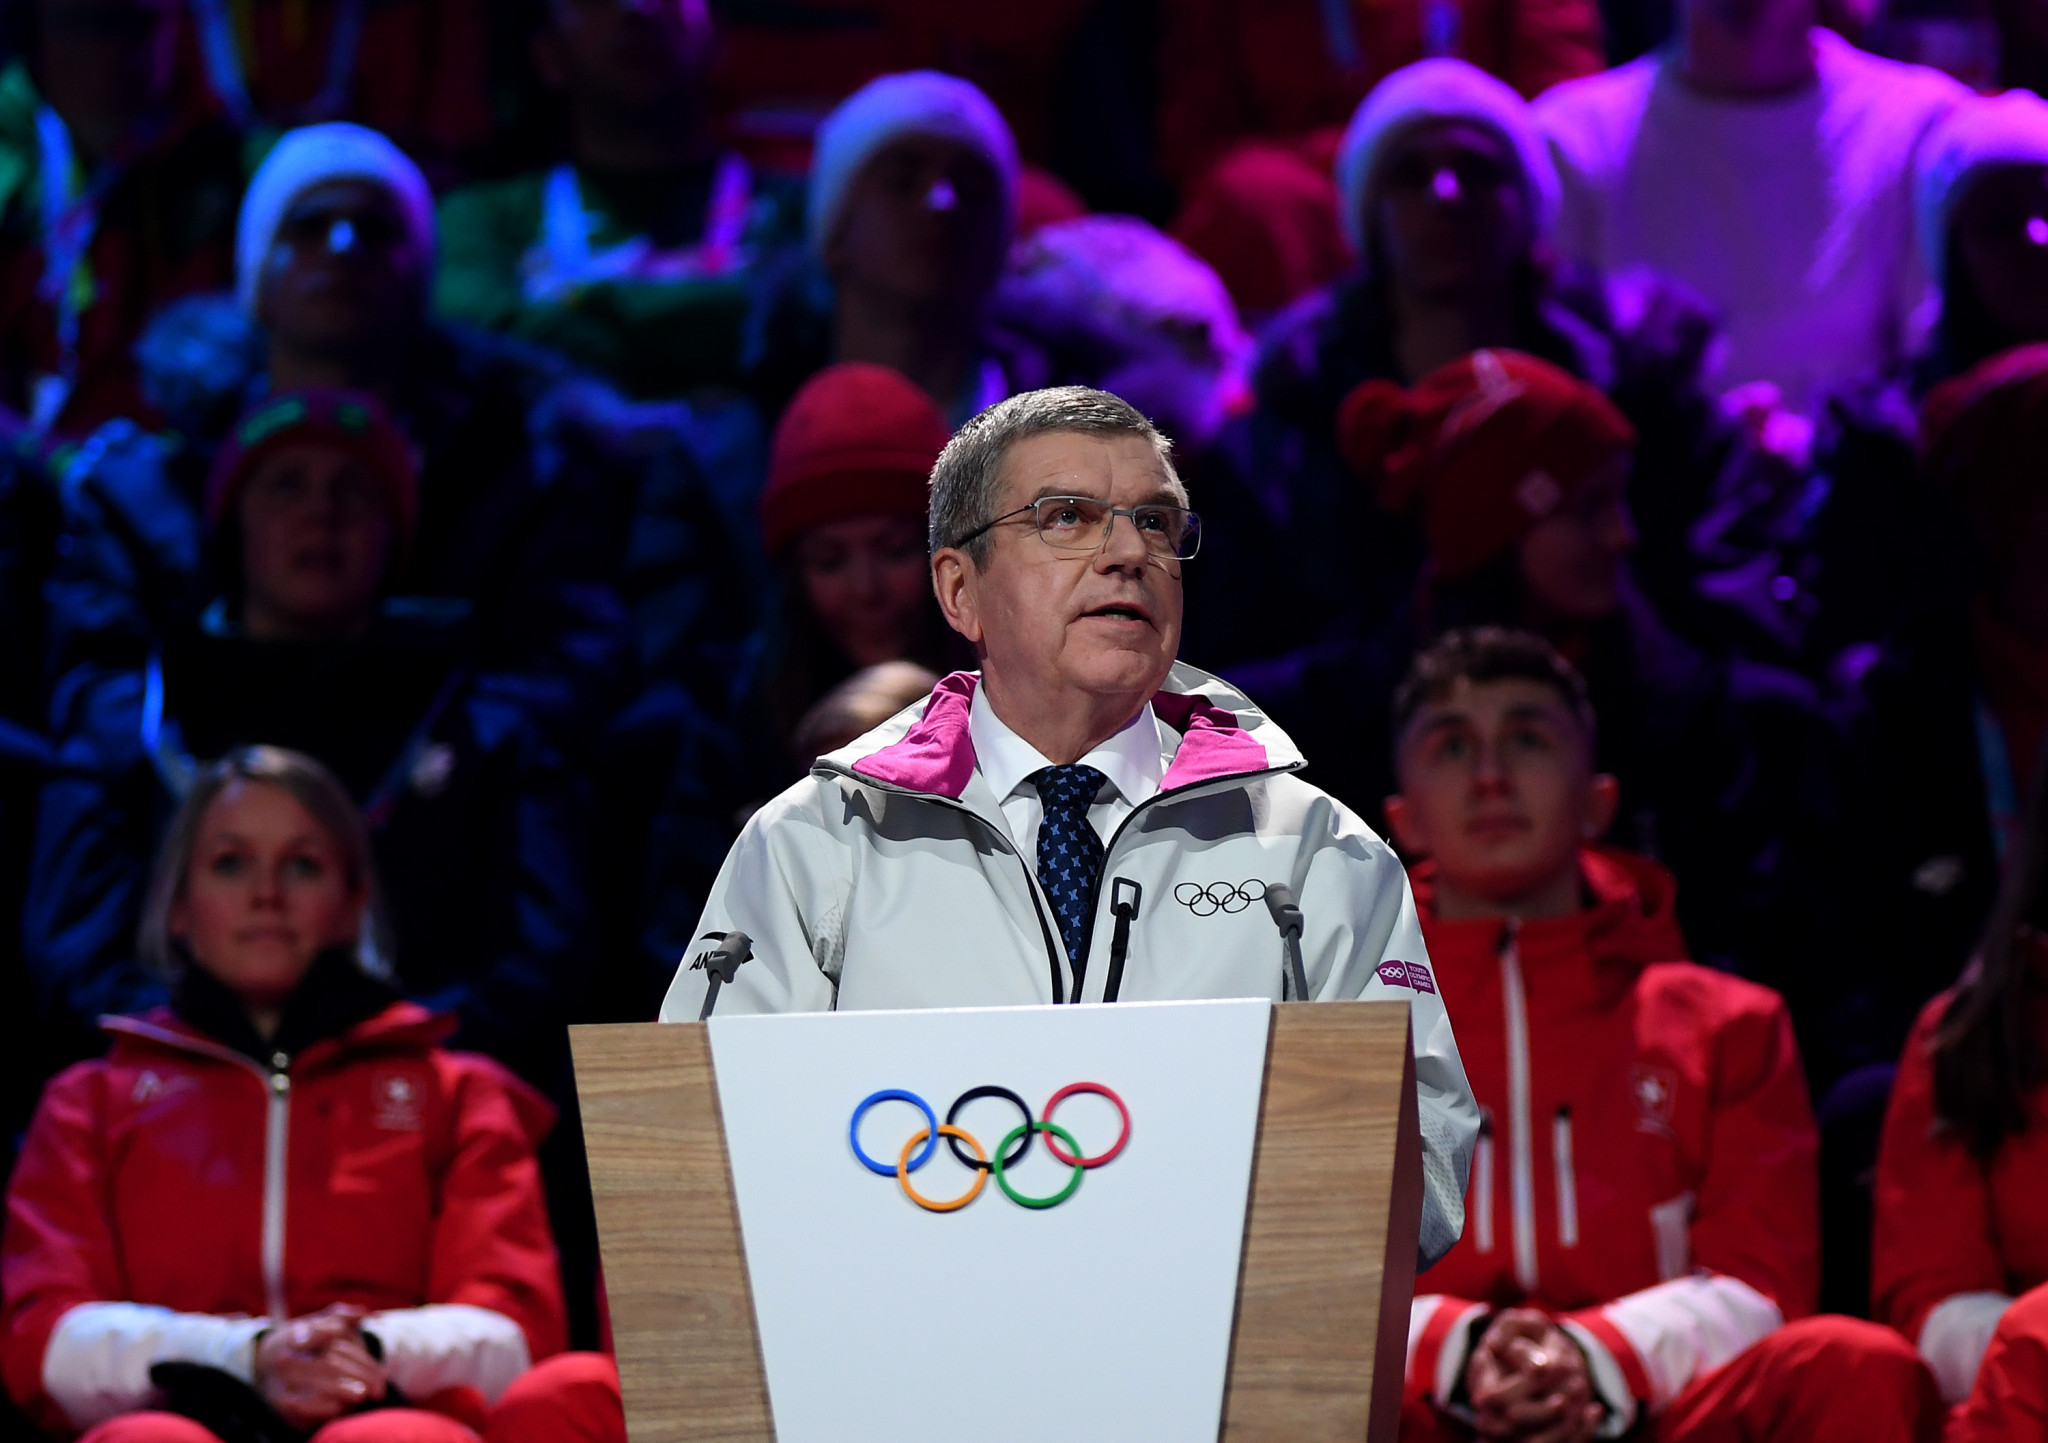 Thomas Bach is certainly interested in using all aspects of the Olympic corporate model ©Getty Images